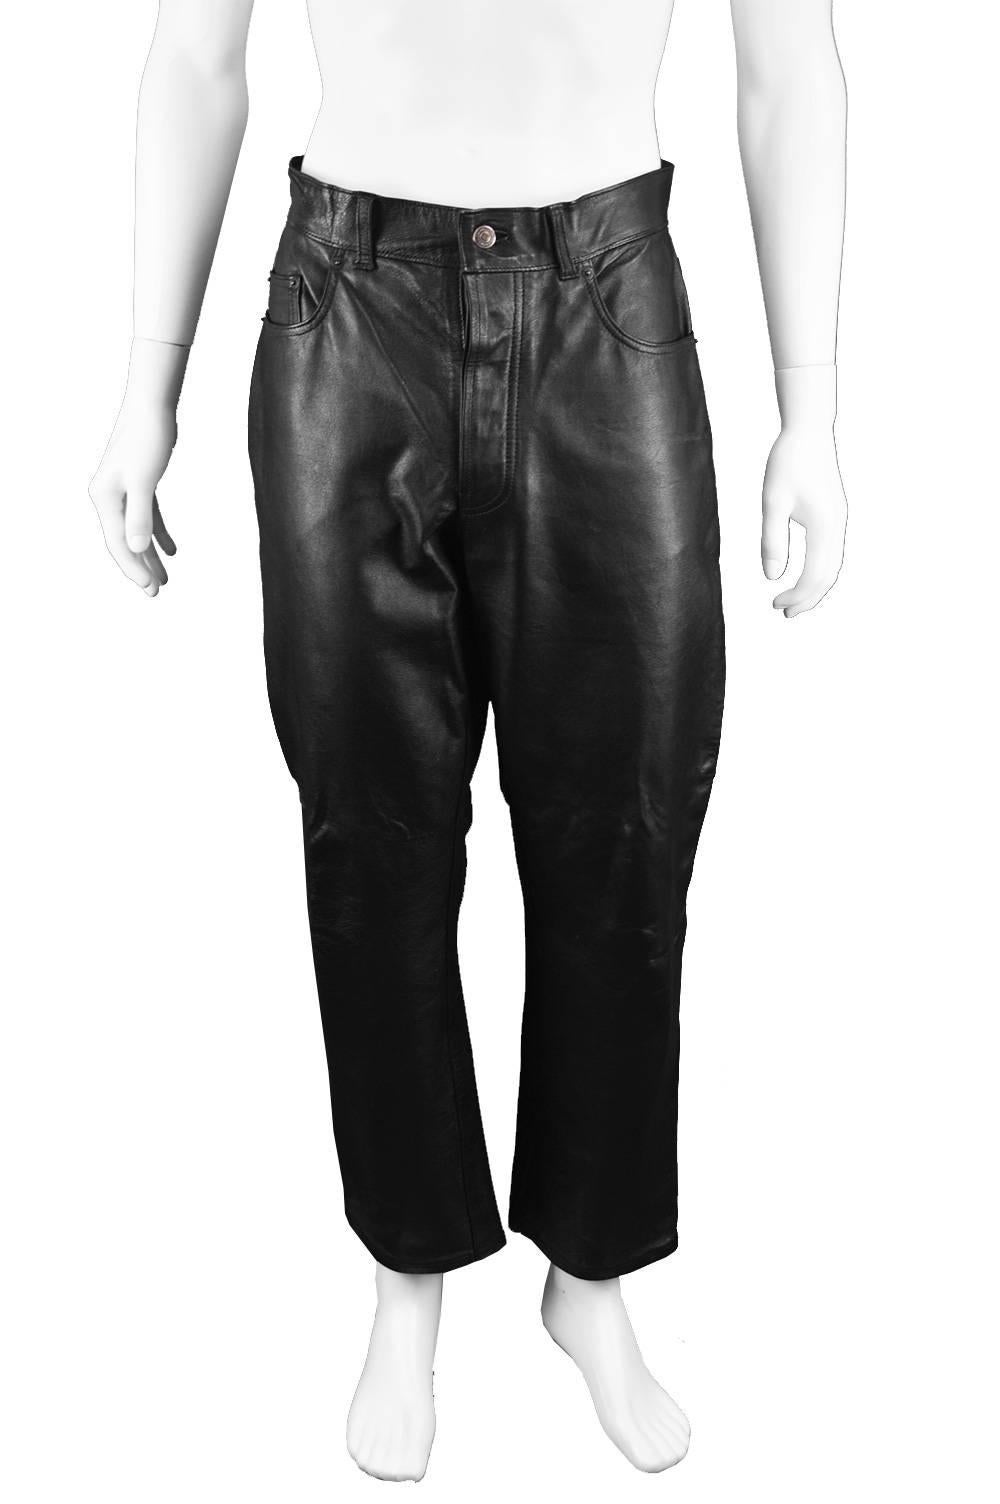 Paul Smith Men's Vintage Black Real Leather Straight Leg Pants, 1990s In Excellent Condition For Sale In Doncaster, South Yorkshire